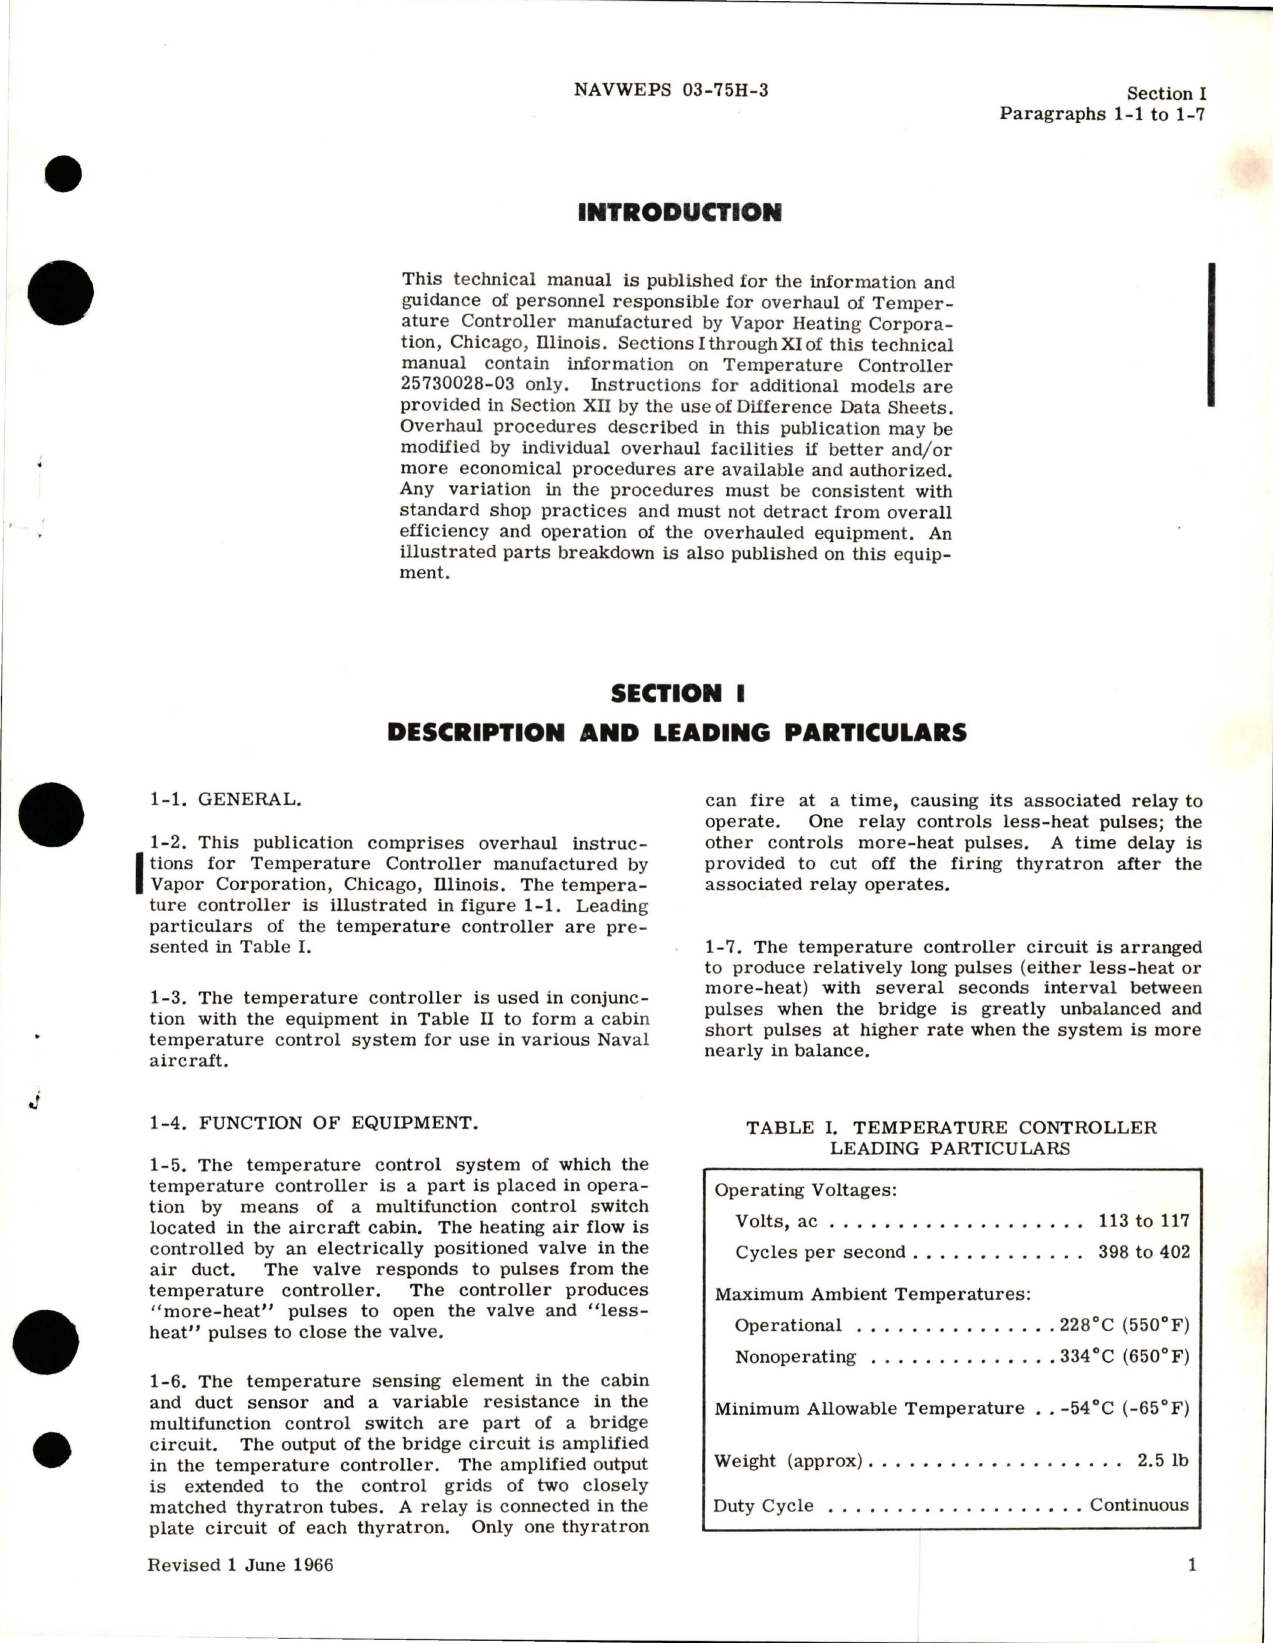 Sample page 5 from AirCorps Library document: Overhaul Instructions for Temperature Controller - Parts 25730028-03 and 25730028-04